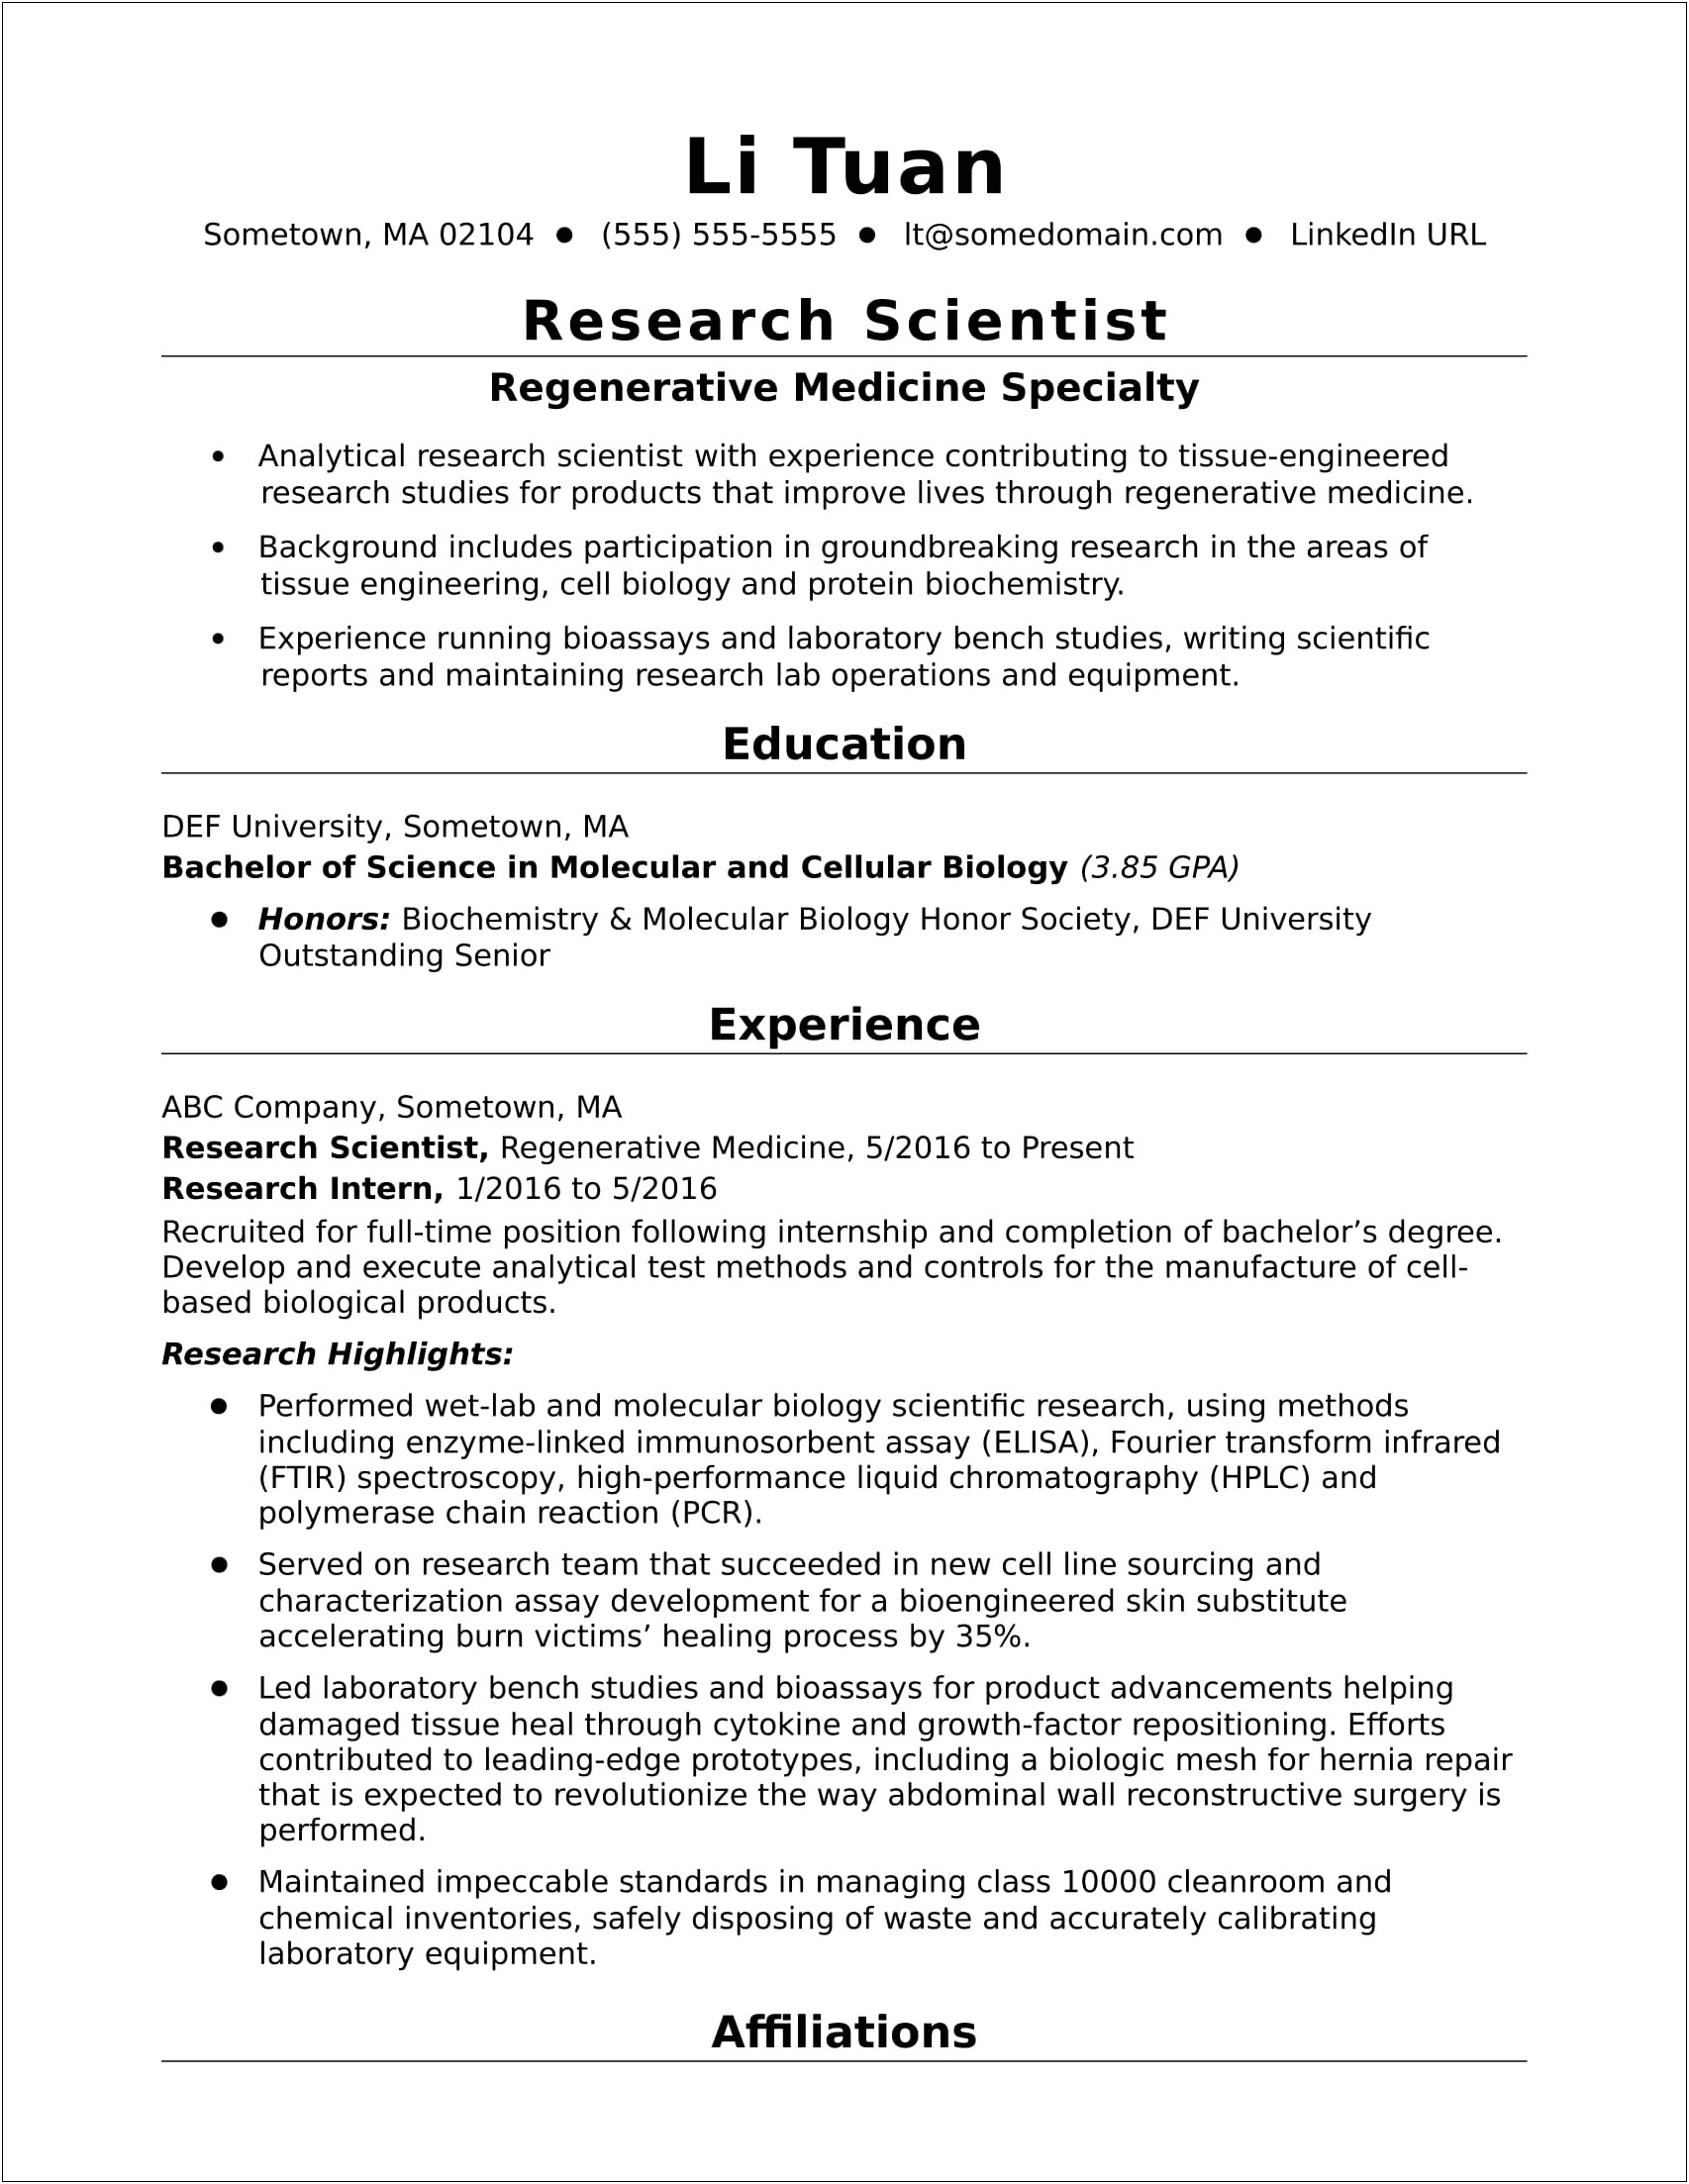 Resume Without Job Experience Samples